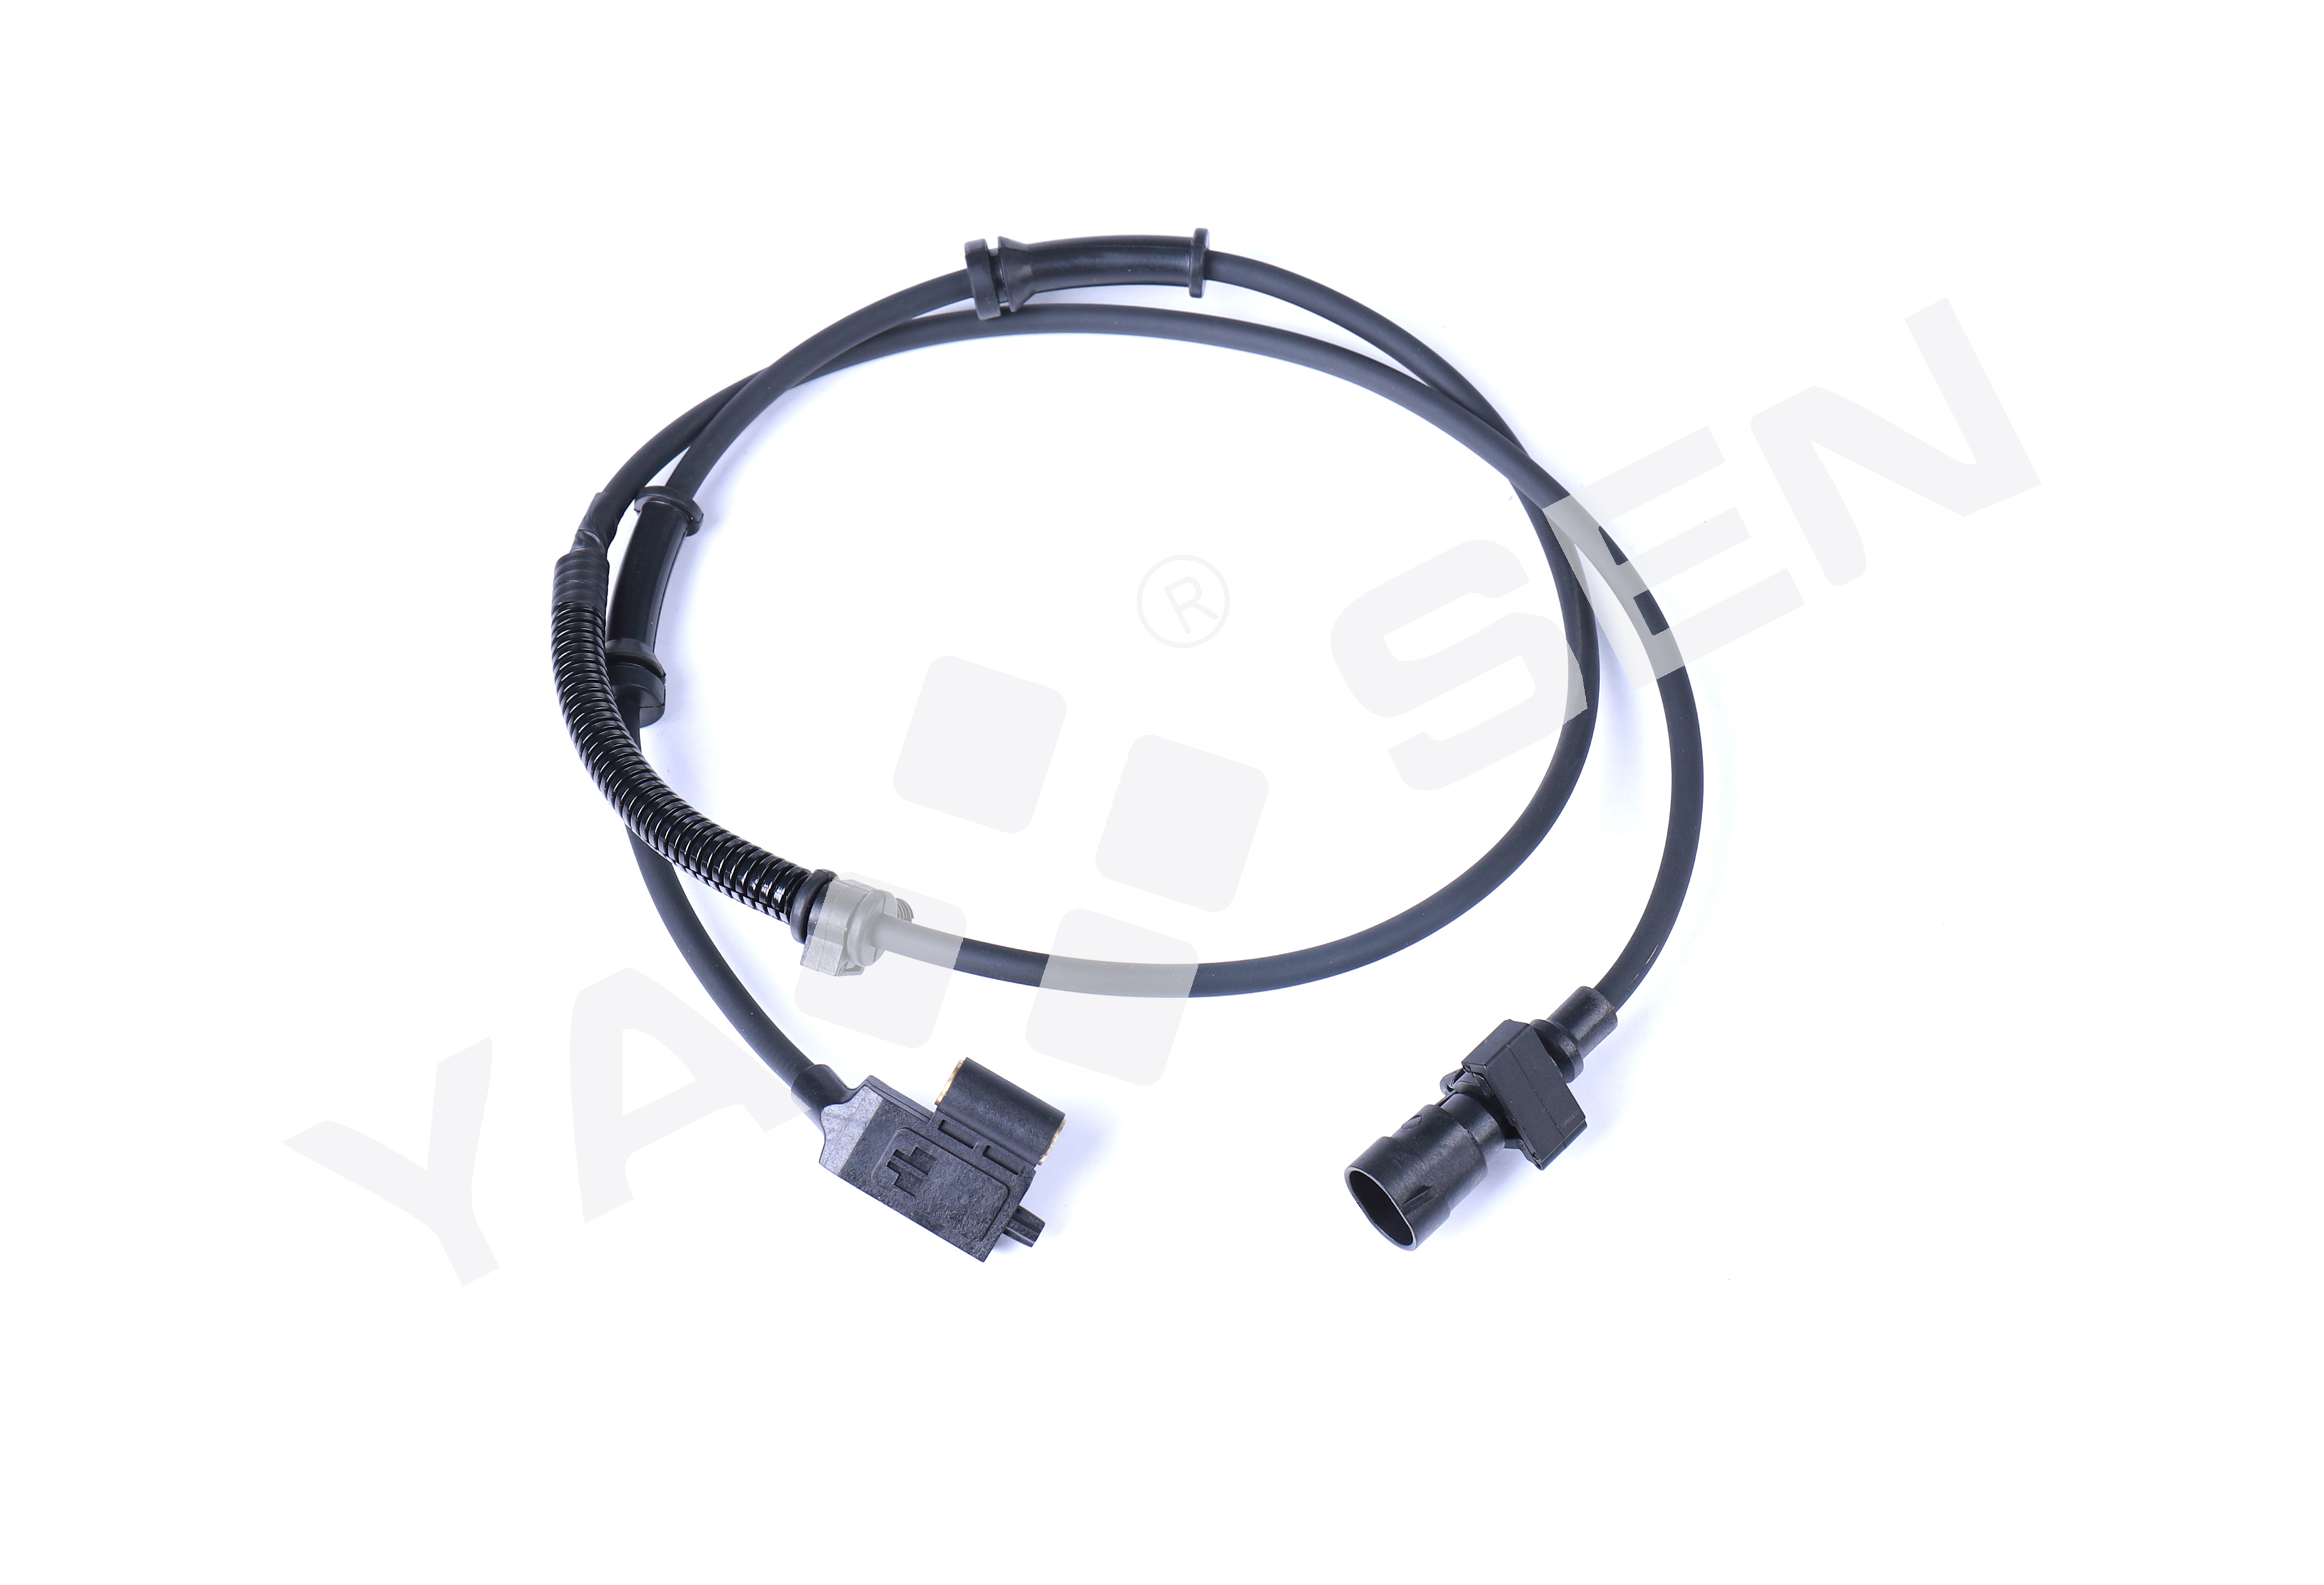 China wholesale Mercedes Benz Abs Sensor - ABS Wheel Speed Sensor for JEEP 56041316AA 56041316AB 56041316AC DS56041316AB SU6889 5S4977 ALS50 970073 – YASEN